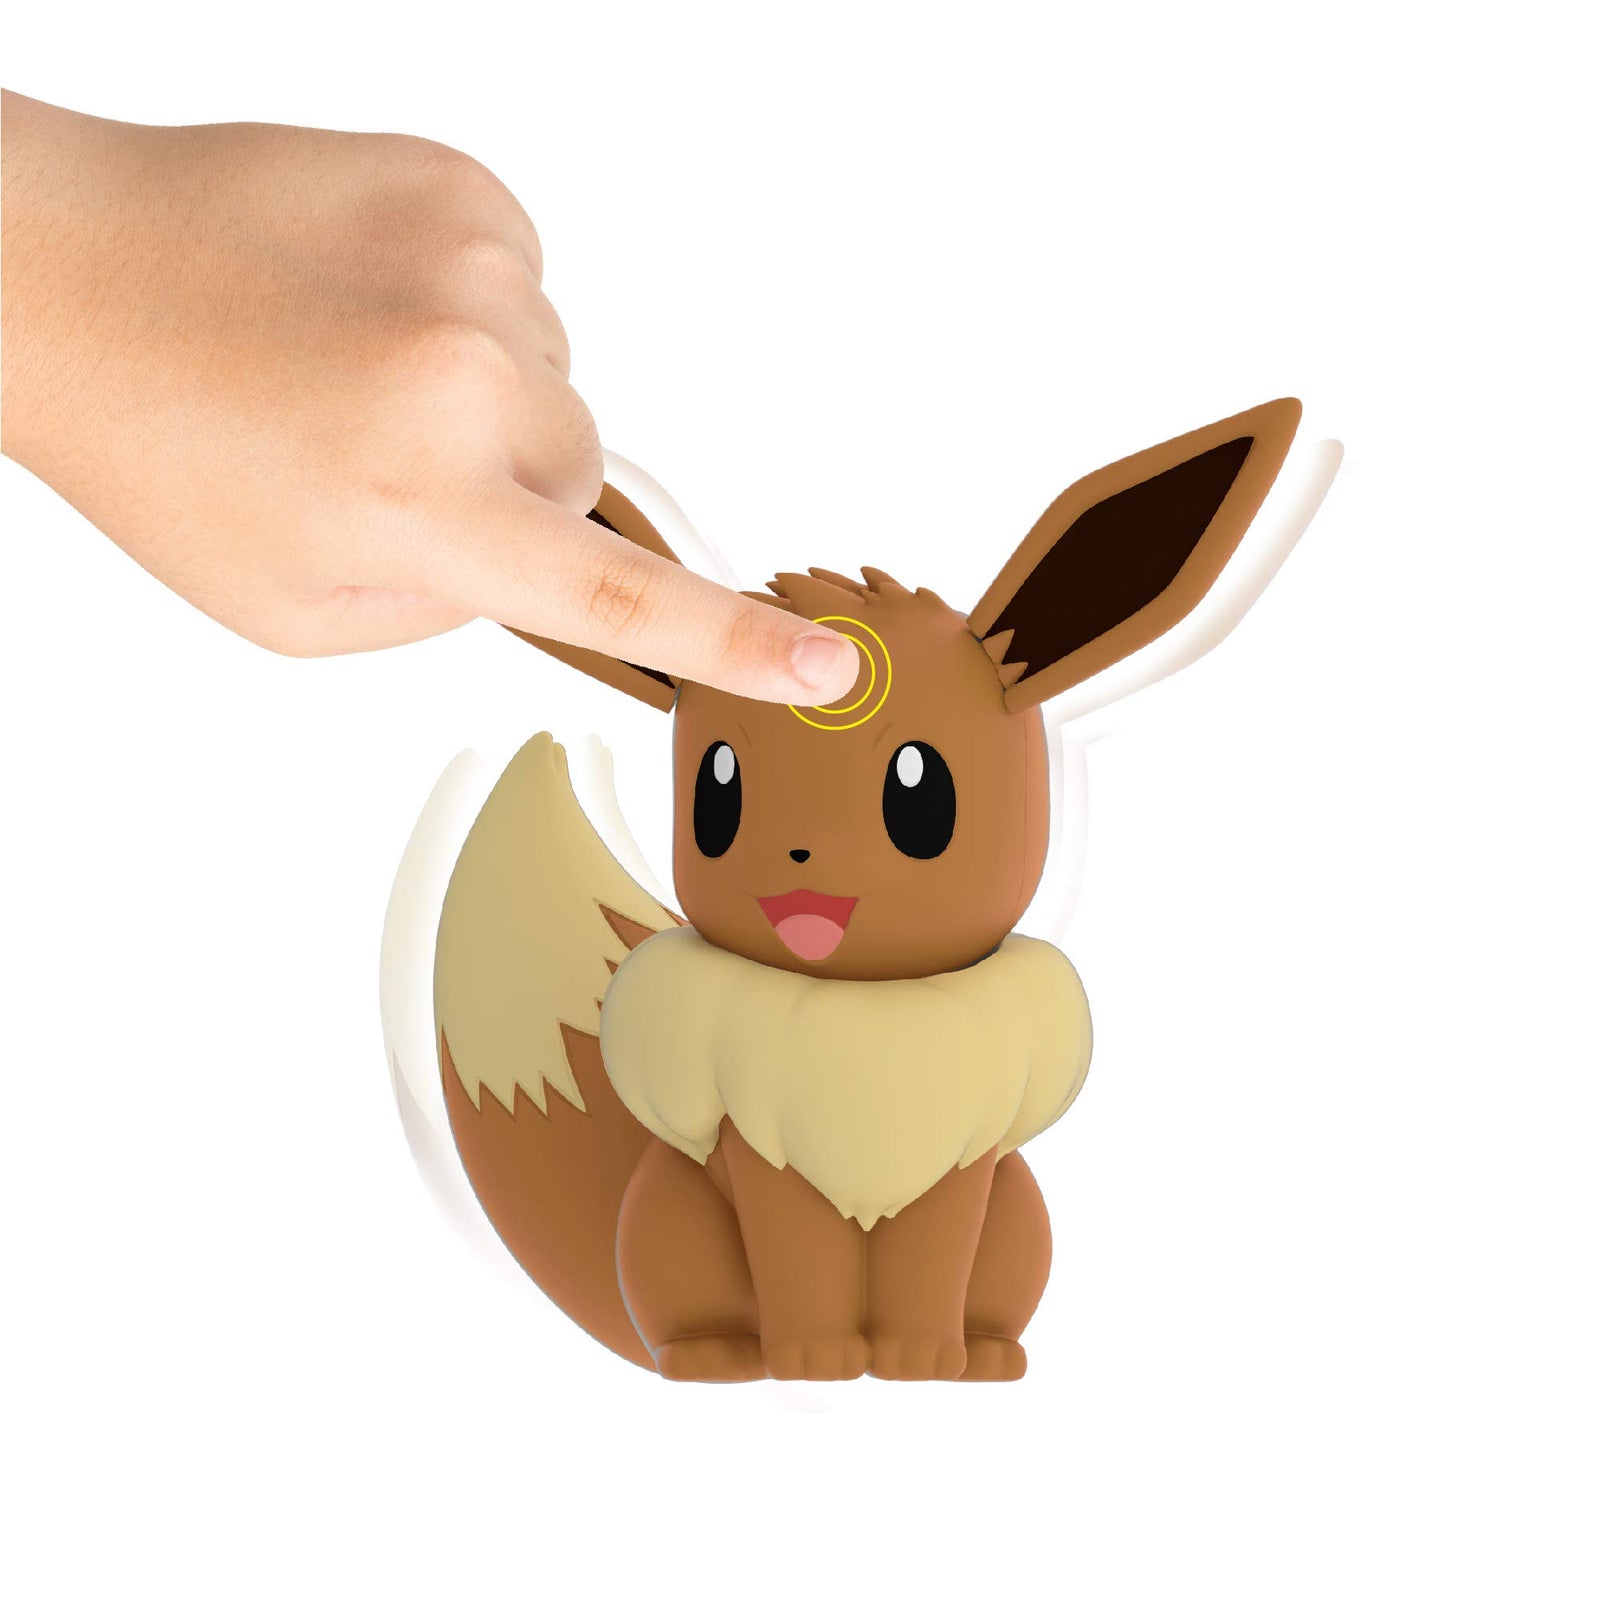 Pokemon Electronic & Interactive My Partner Eevee - Reacts to Touch & Sound, Over 50 Different Interactions with Movement and Sound - Eevee Dances, Moves & Speaks - Gotta Catch ‘Em All , Brown